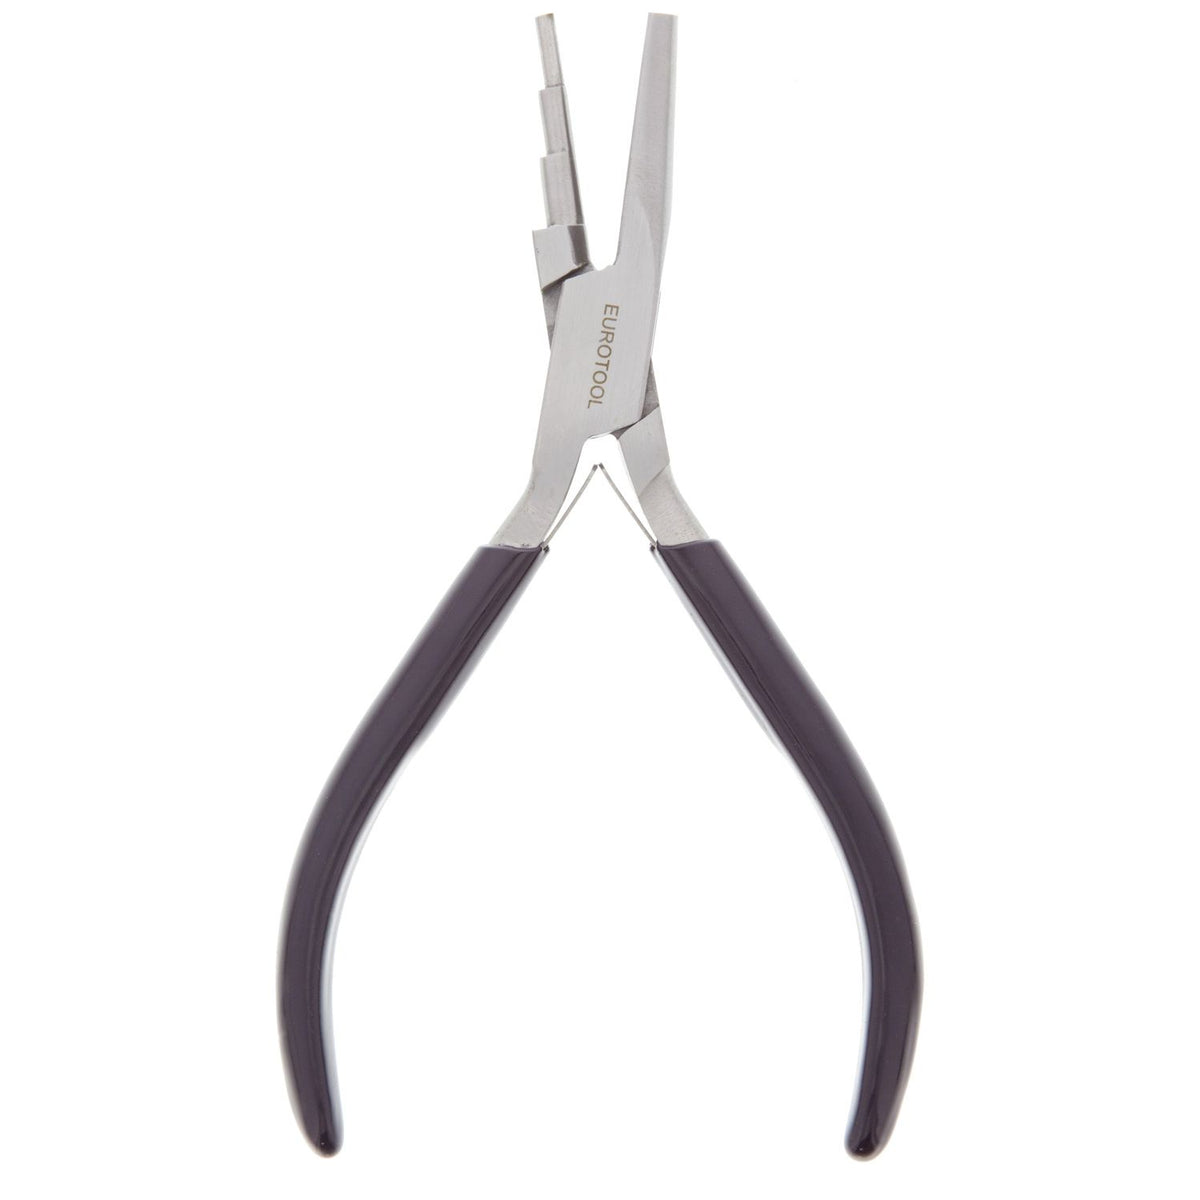 Knipex Tools - Mini Pliers Wrench (125mm/5in)